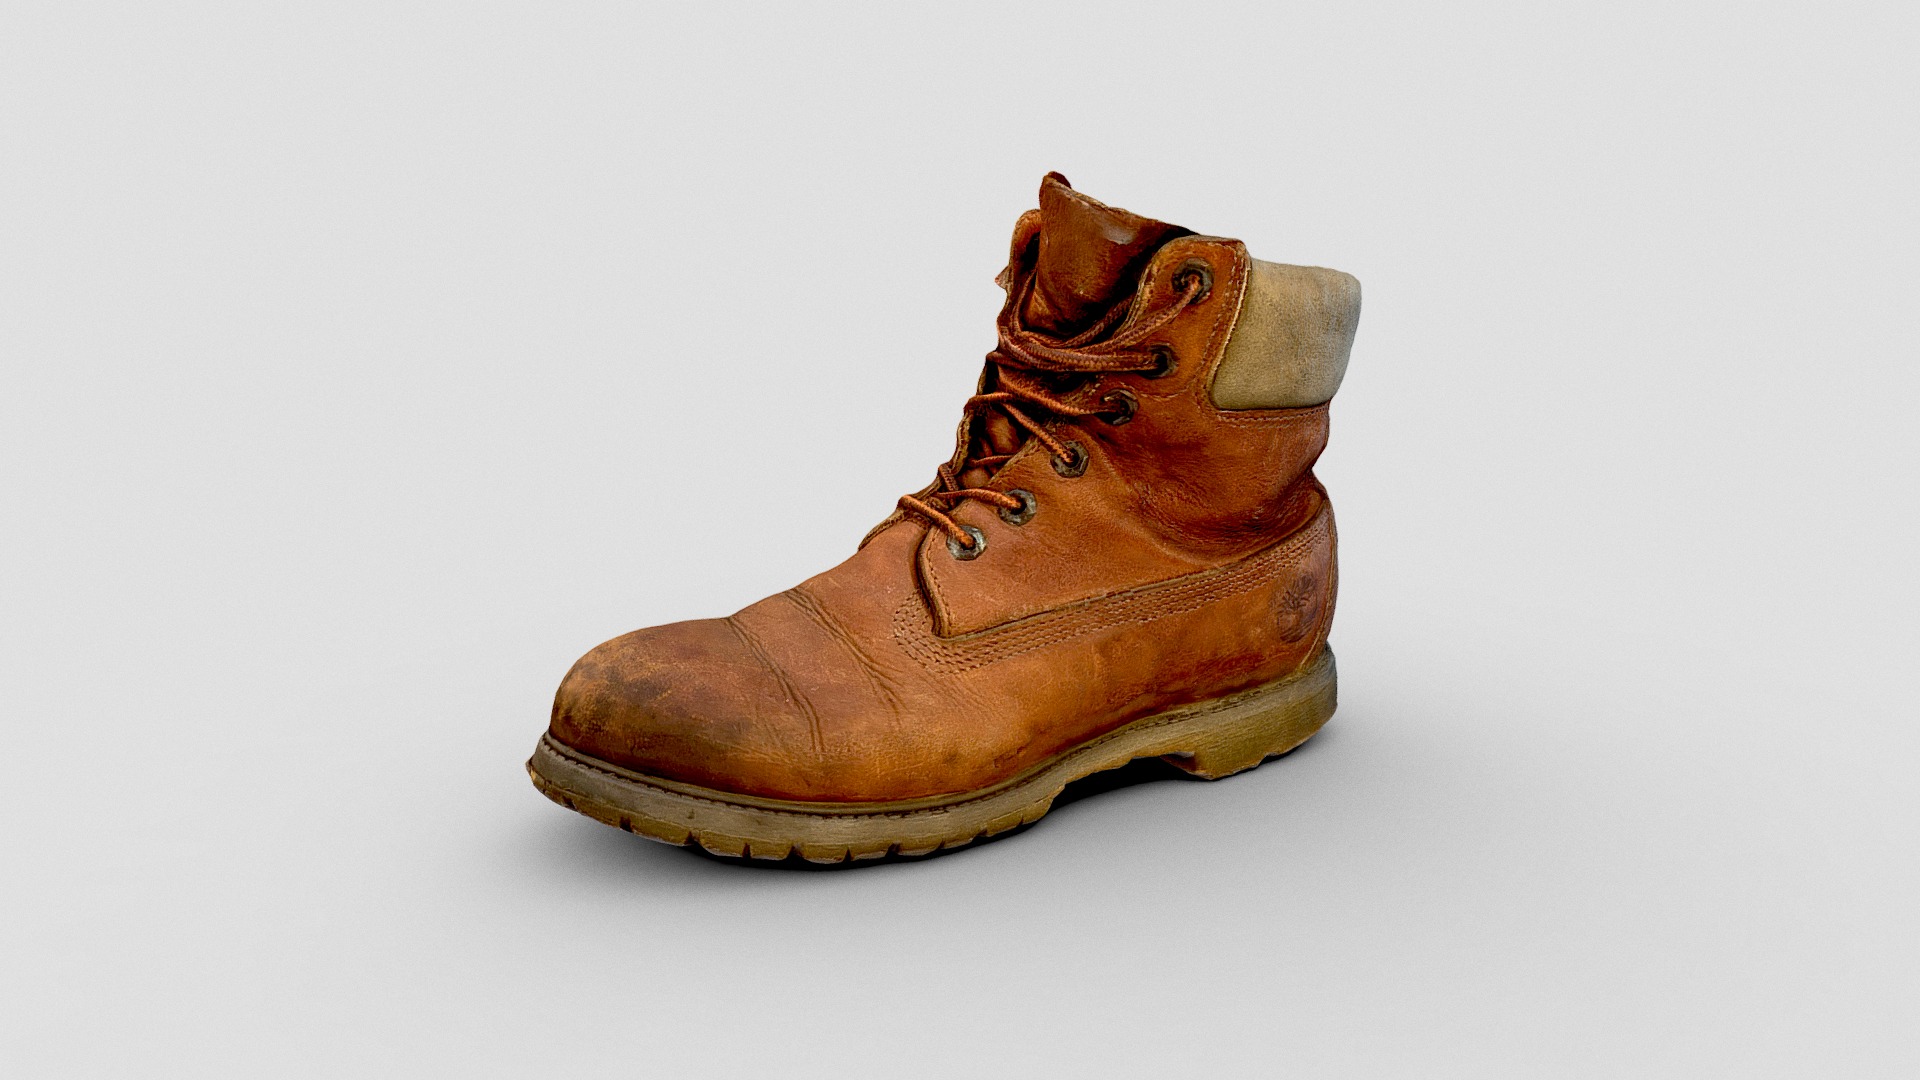 3D model Old Timberland boot - This is a 3D model of the Old Timberland boot. The 3D model is about a brown and white shoe.